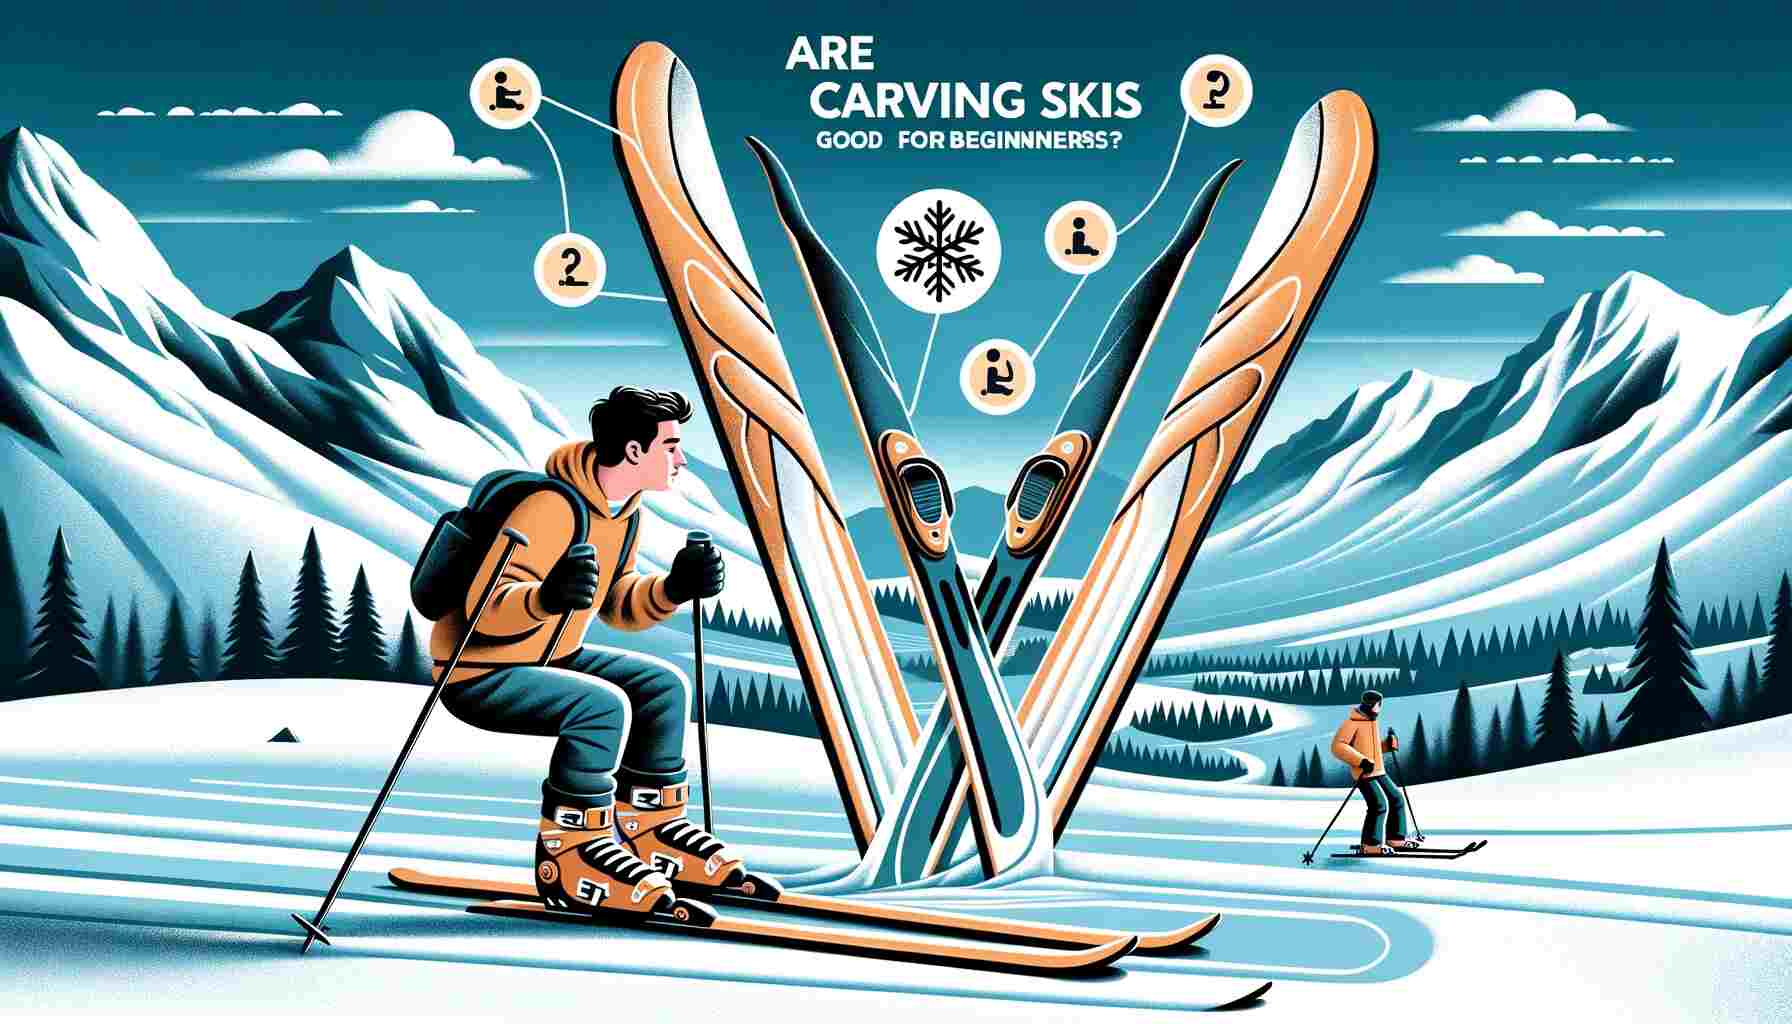 Here is the featured image illustrating the concept for Are Carving Skis Good for Beginners? with a beginner skier using carving skis on a snowy mountain. The title is prominently displayed at the top.